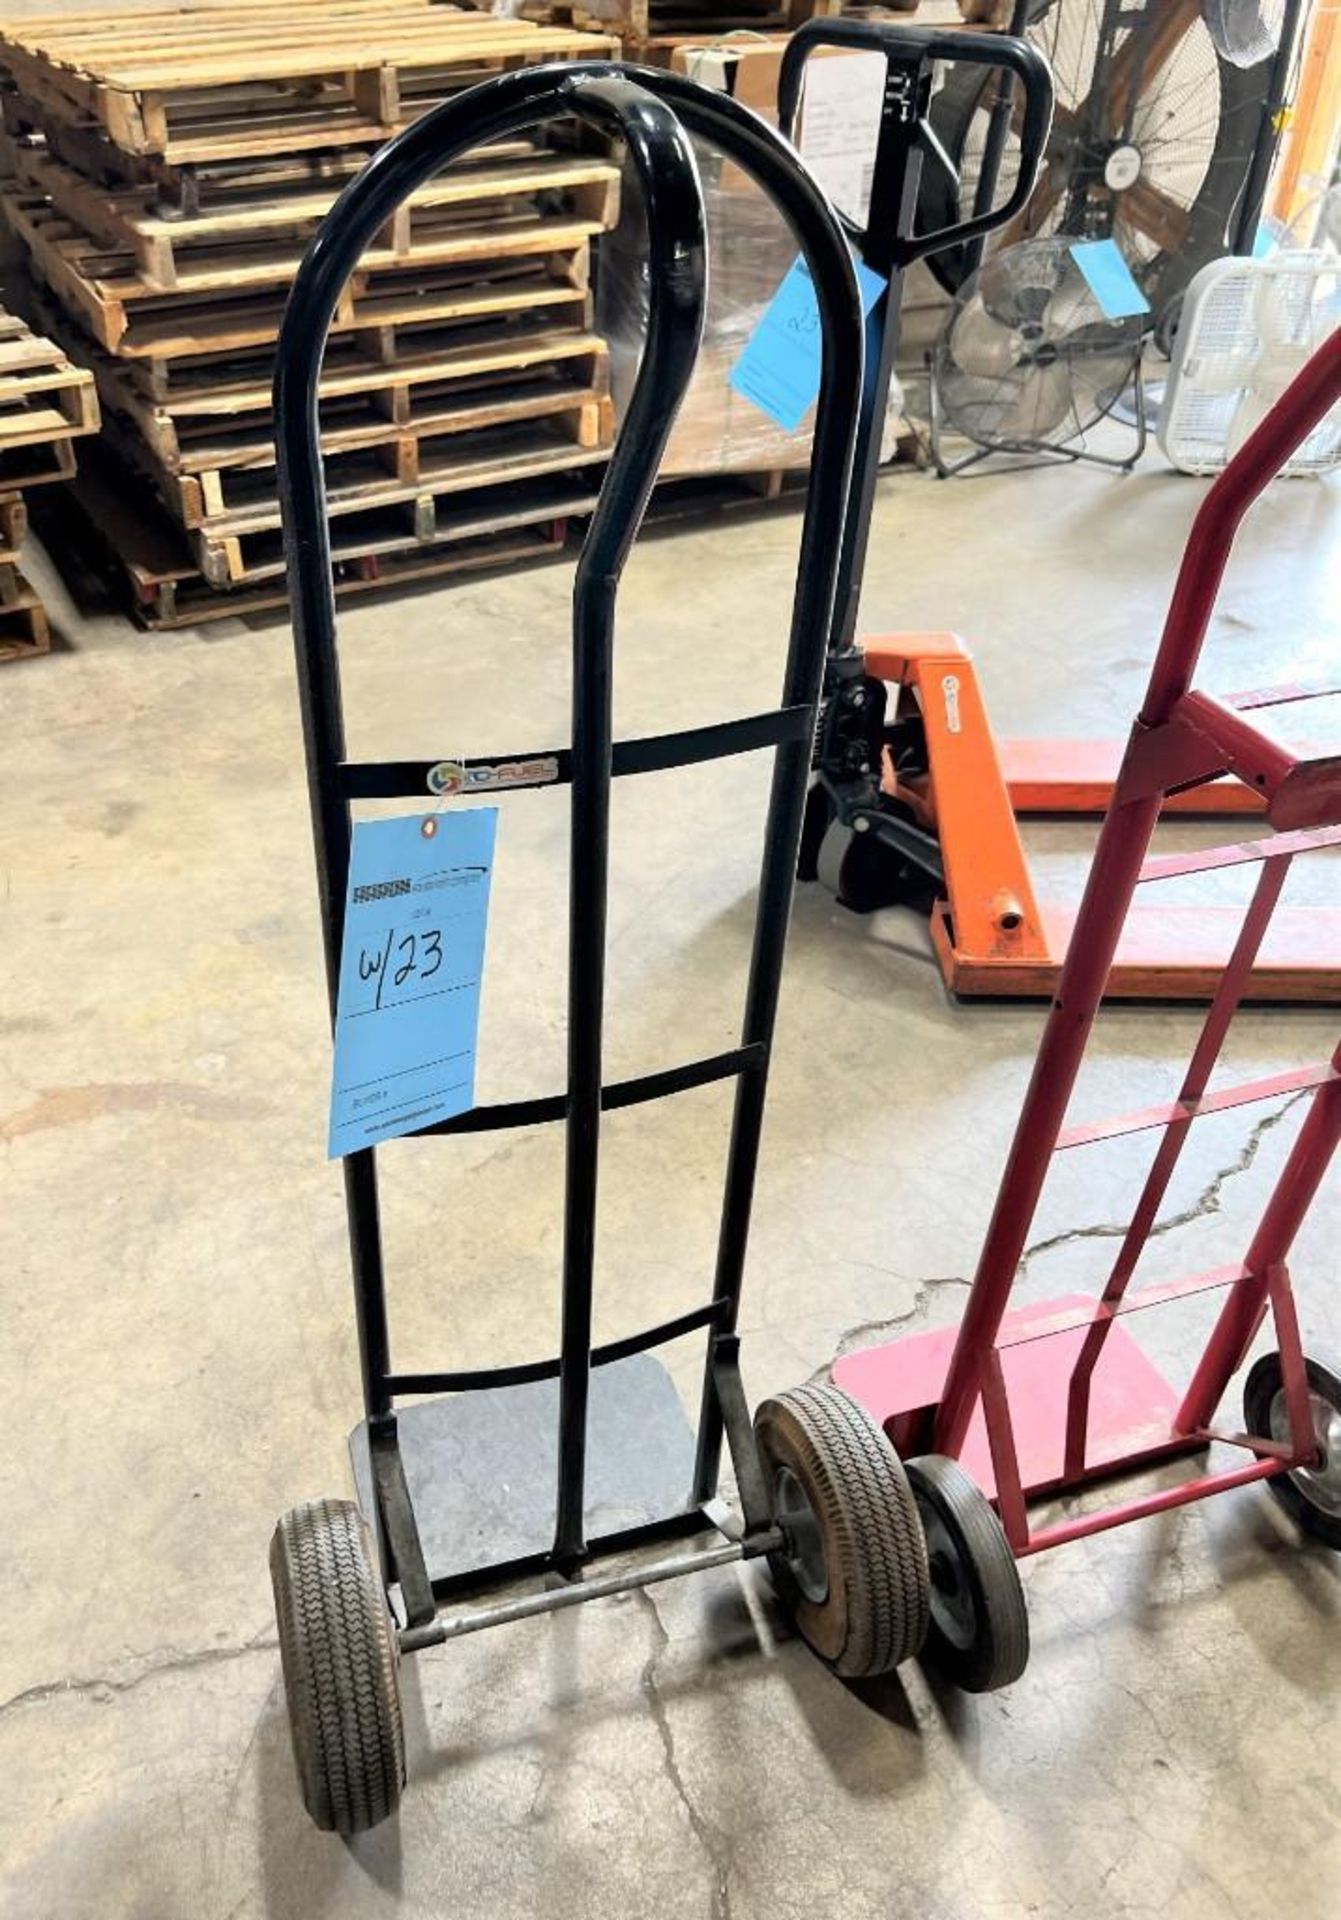 Lot Consisting Of: (1) Zowell 5500 Pound Capacity Pallet Jack, Model DF25, Serial# 14122427-2/131, B - Image 6 of 8